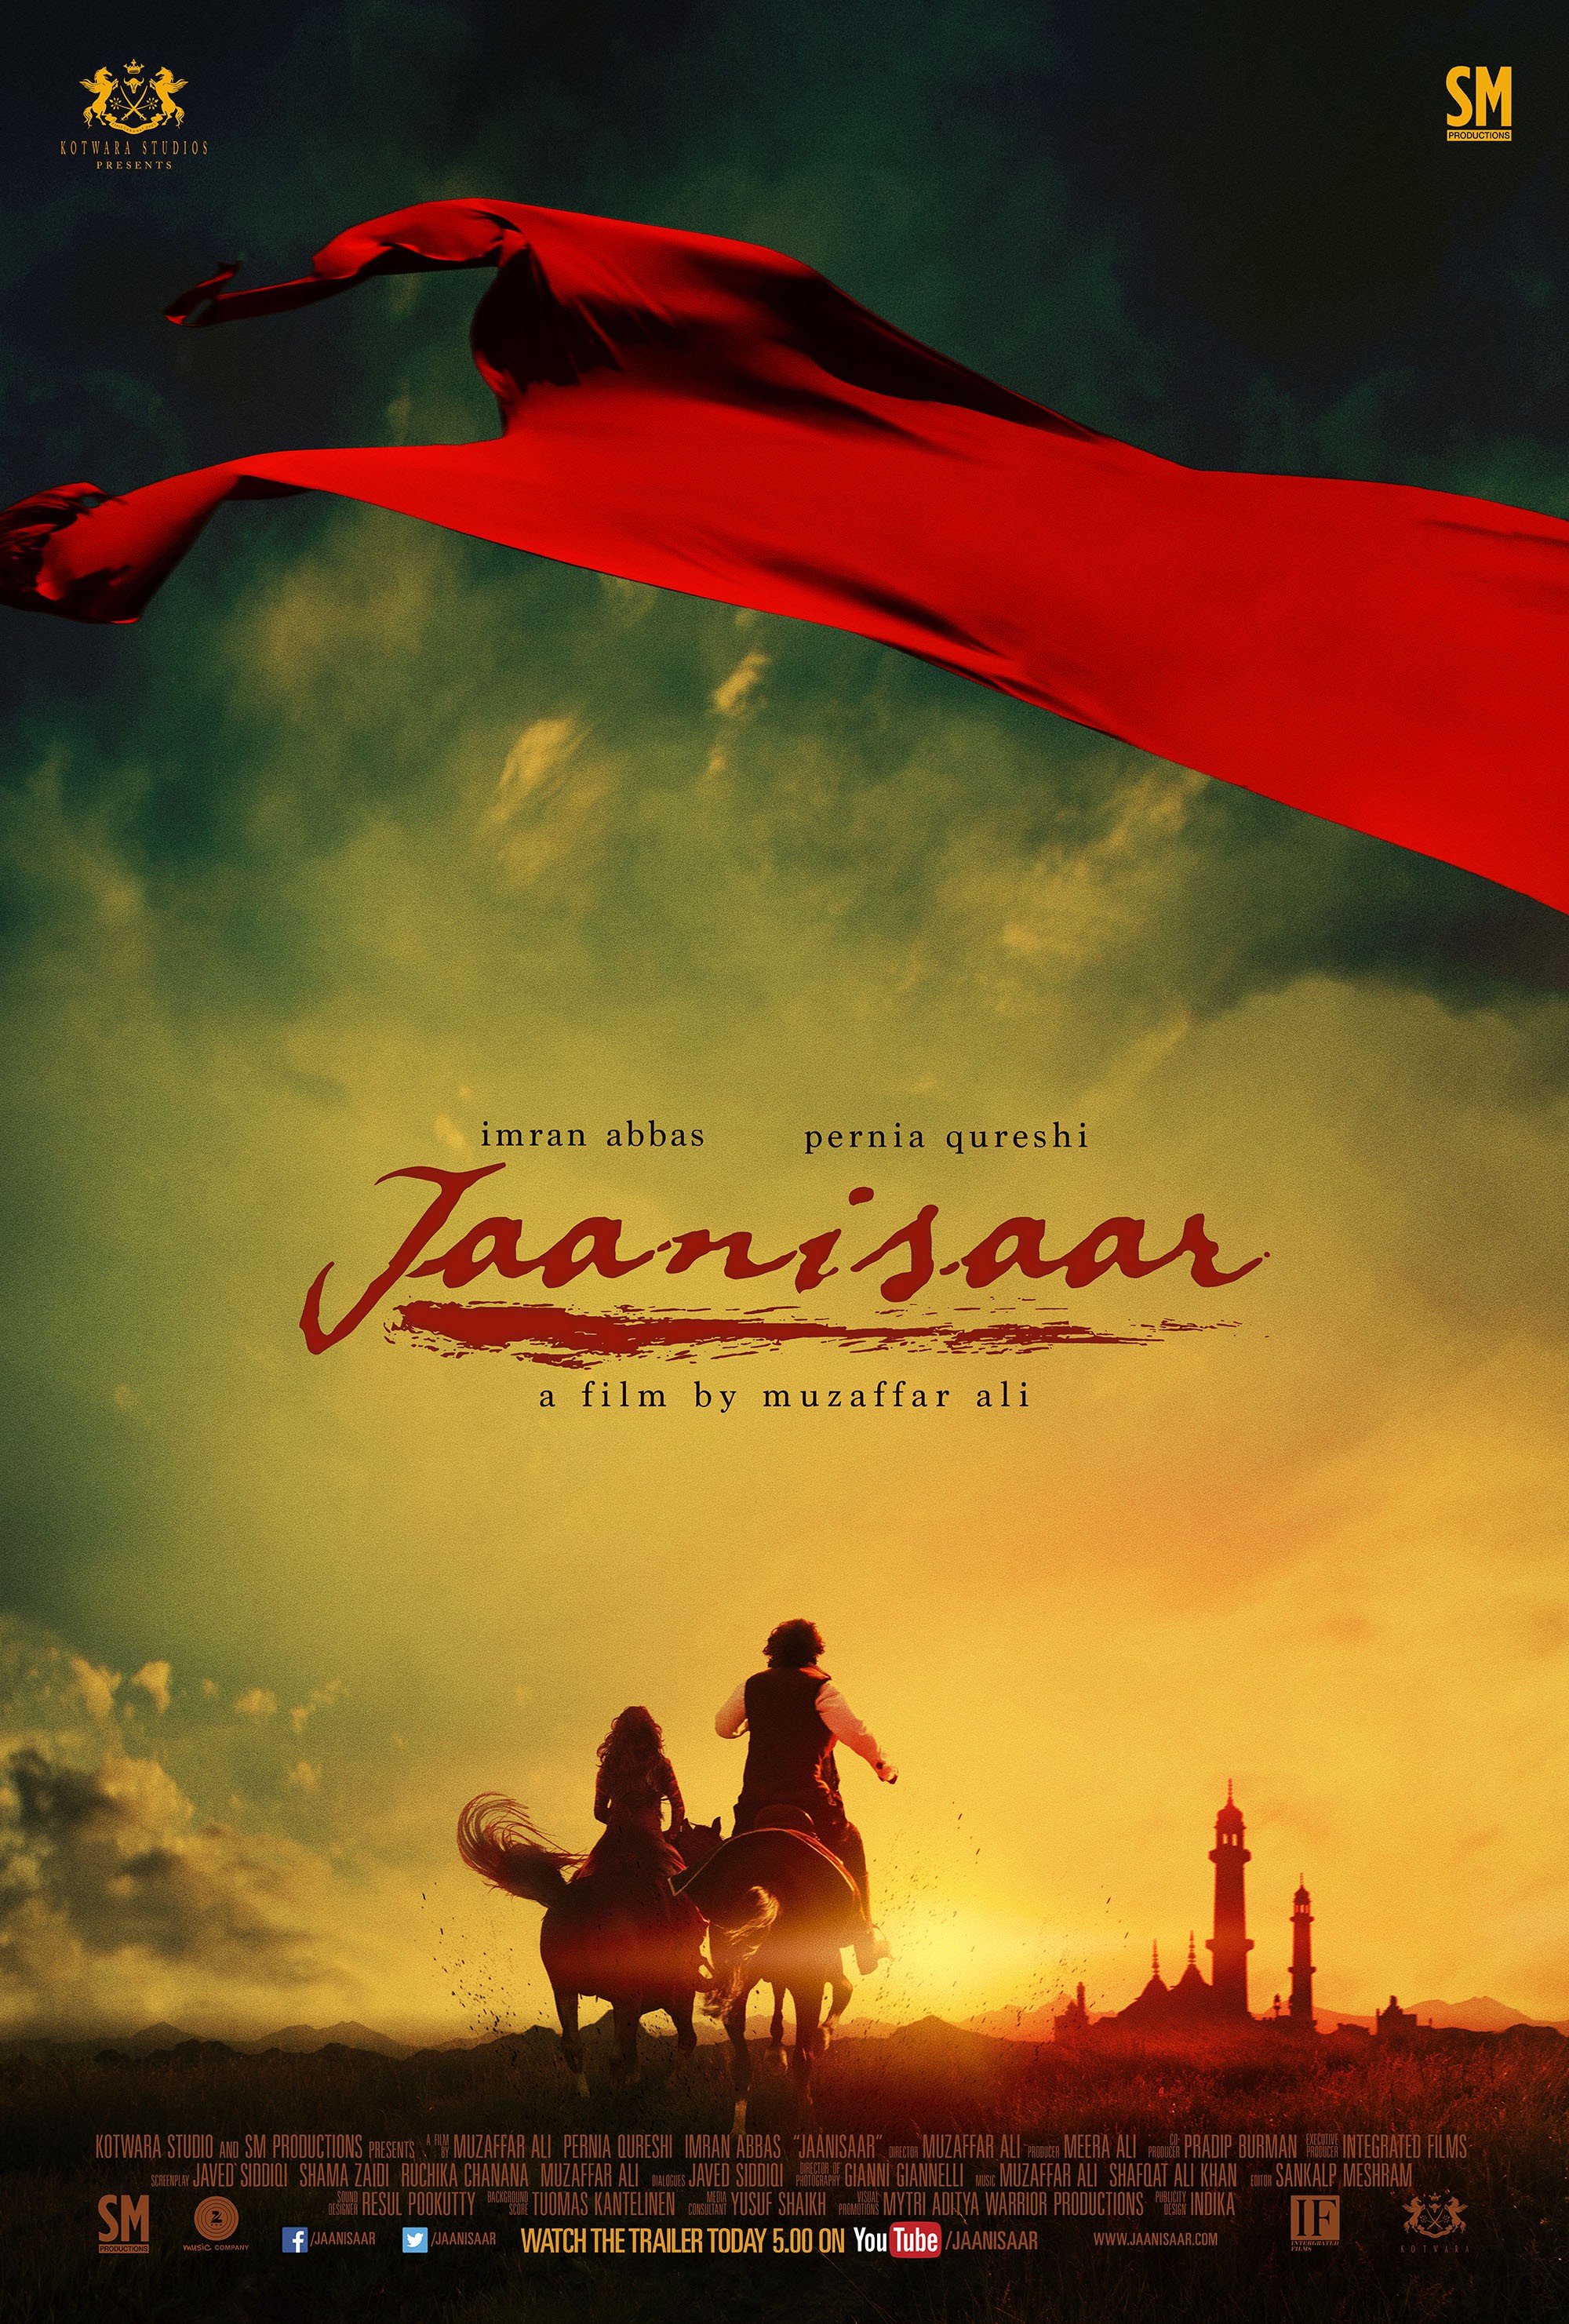 Mega Sized Movie Poster Image for Jaanisaar (#5 of 6)